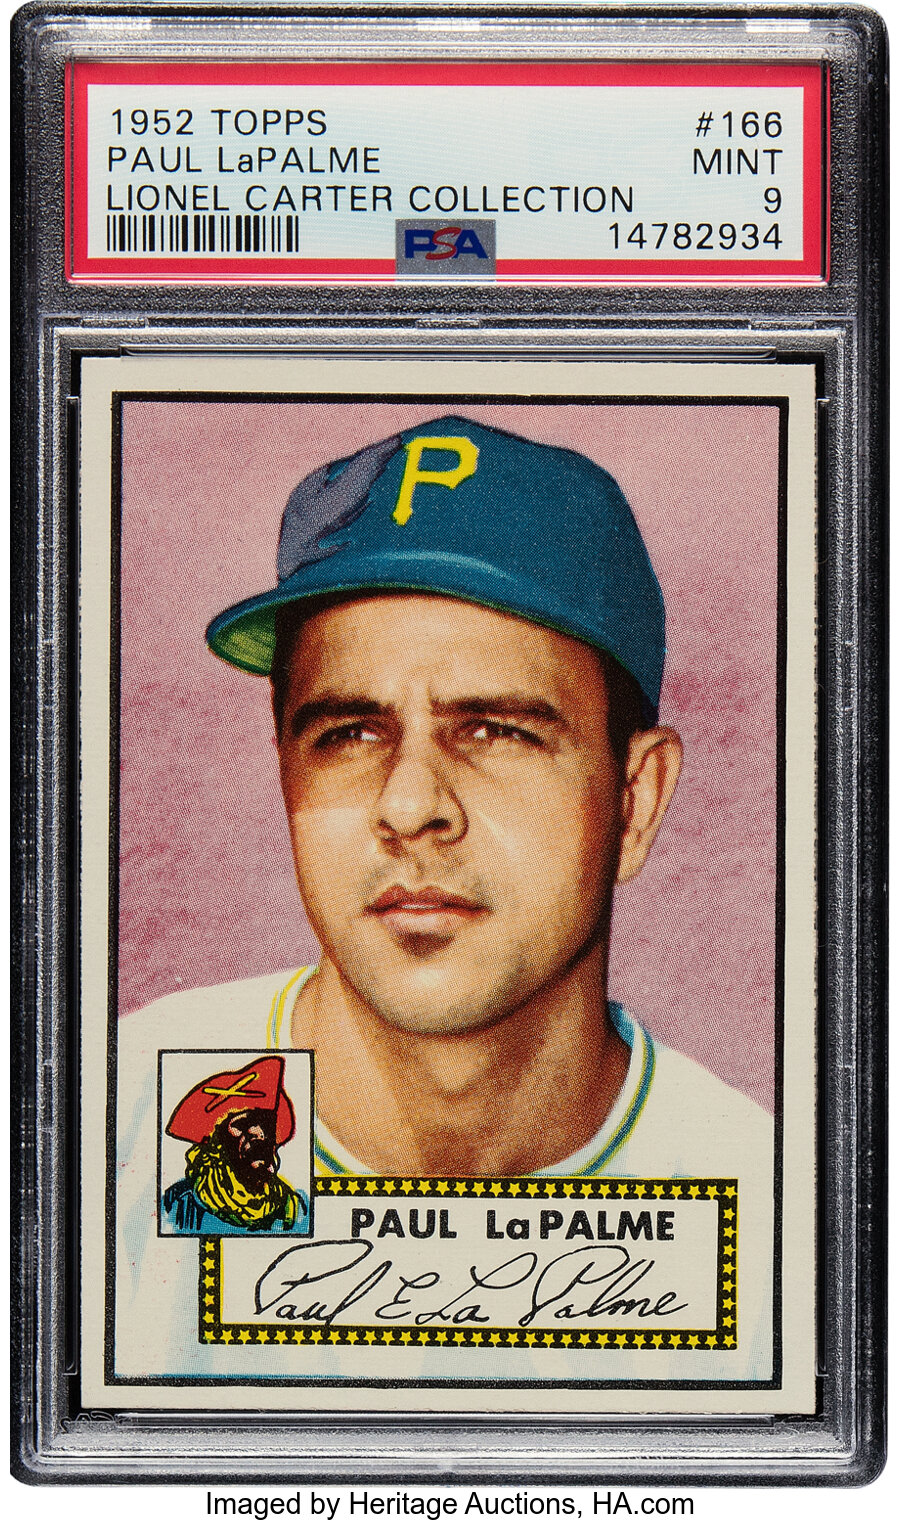 1952 Topps Paul LaPalme Rookie #166 PSA Mint 9 - Pop Three, None Superior! From the Lionel Carter Collection